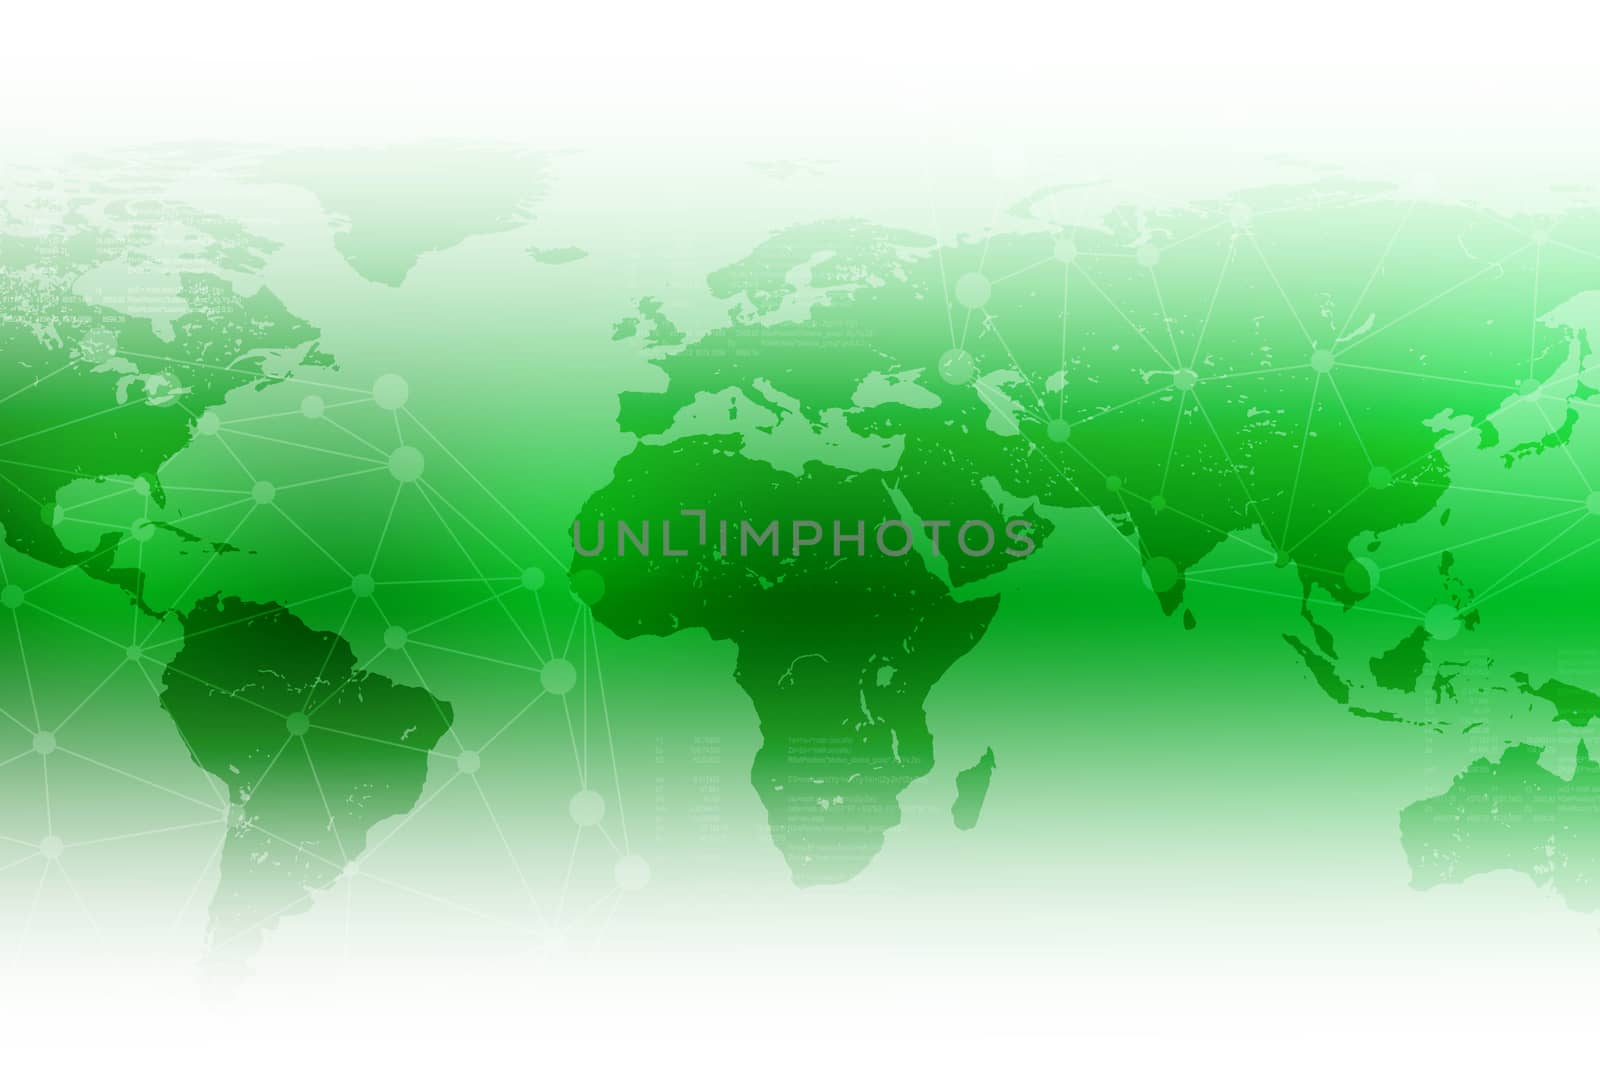 Bright abstract green background with world map and molecule